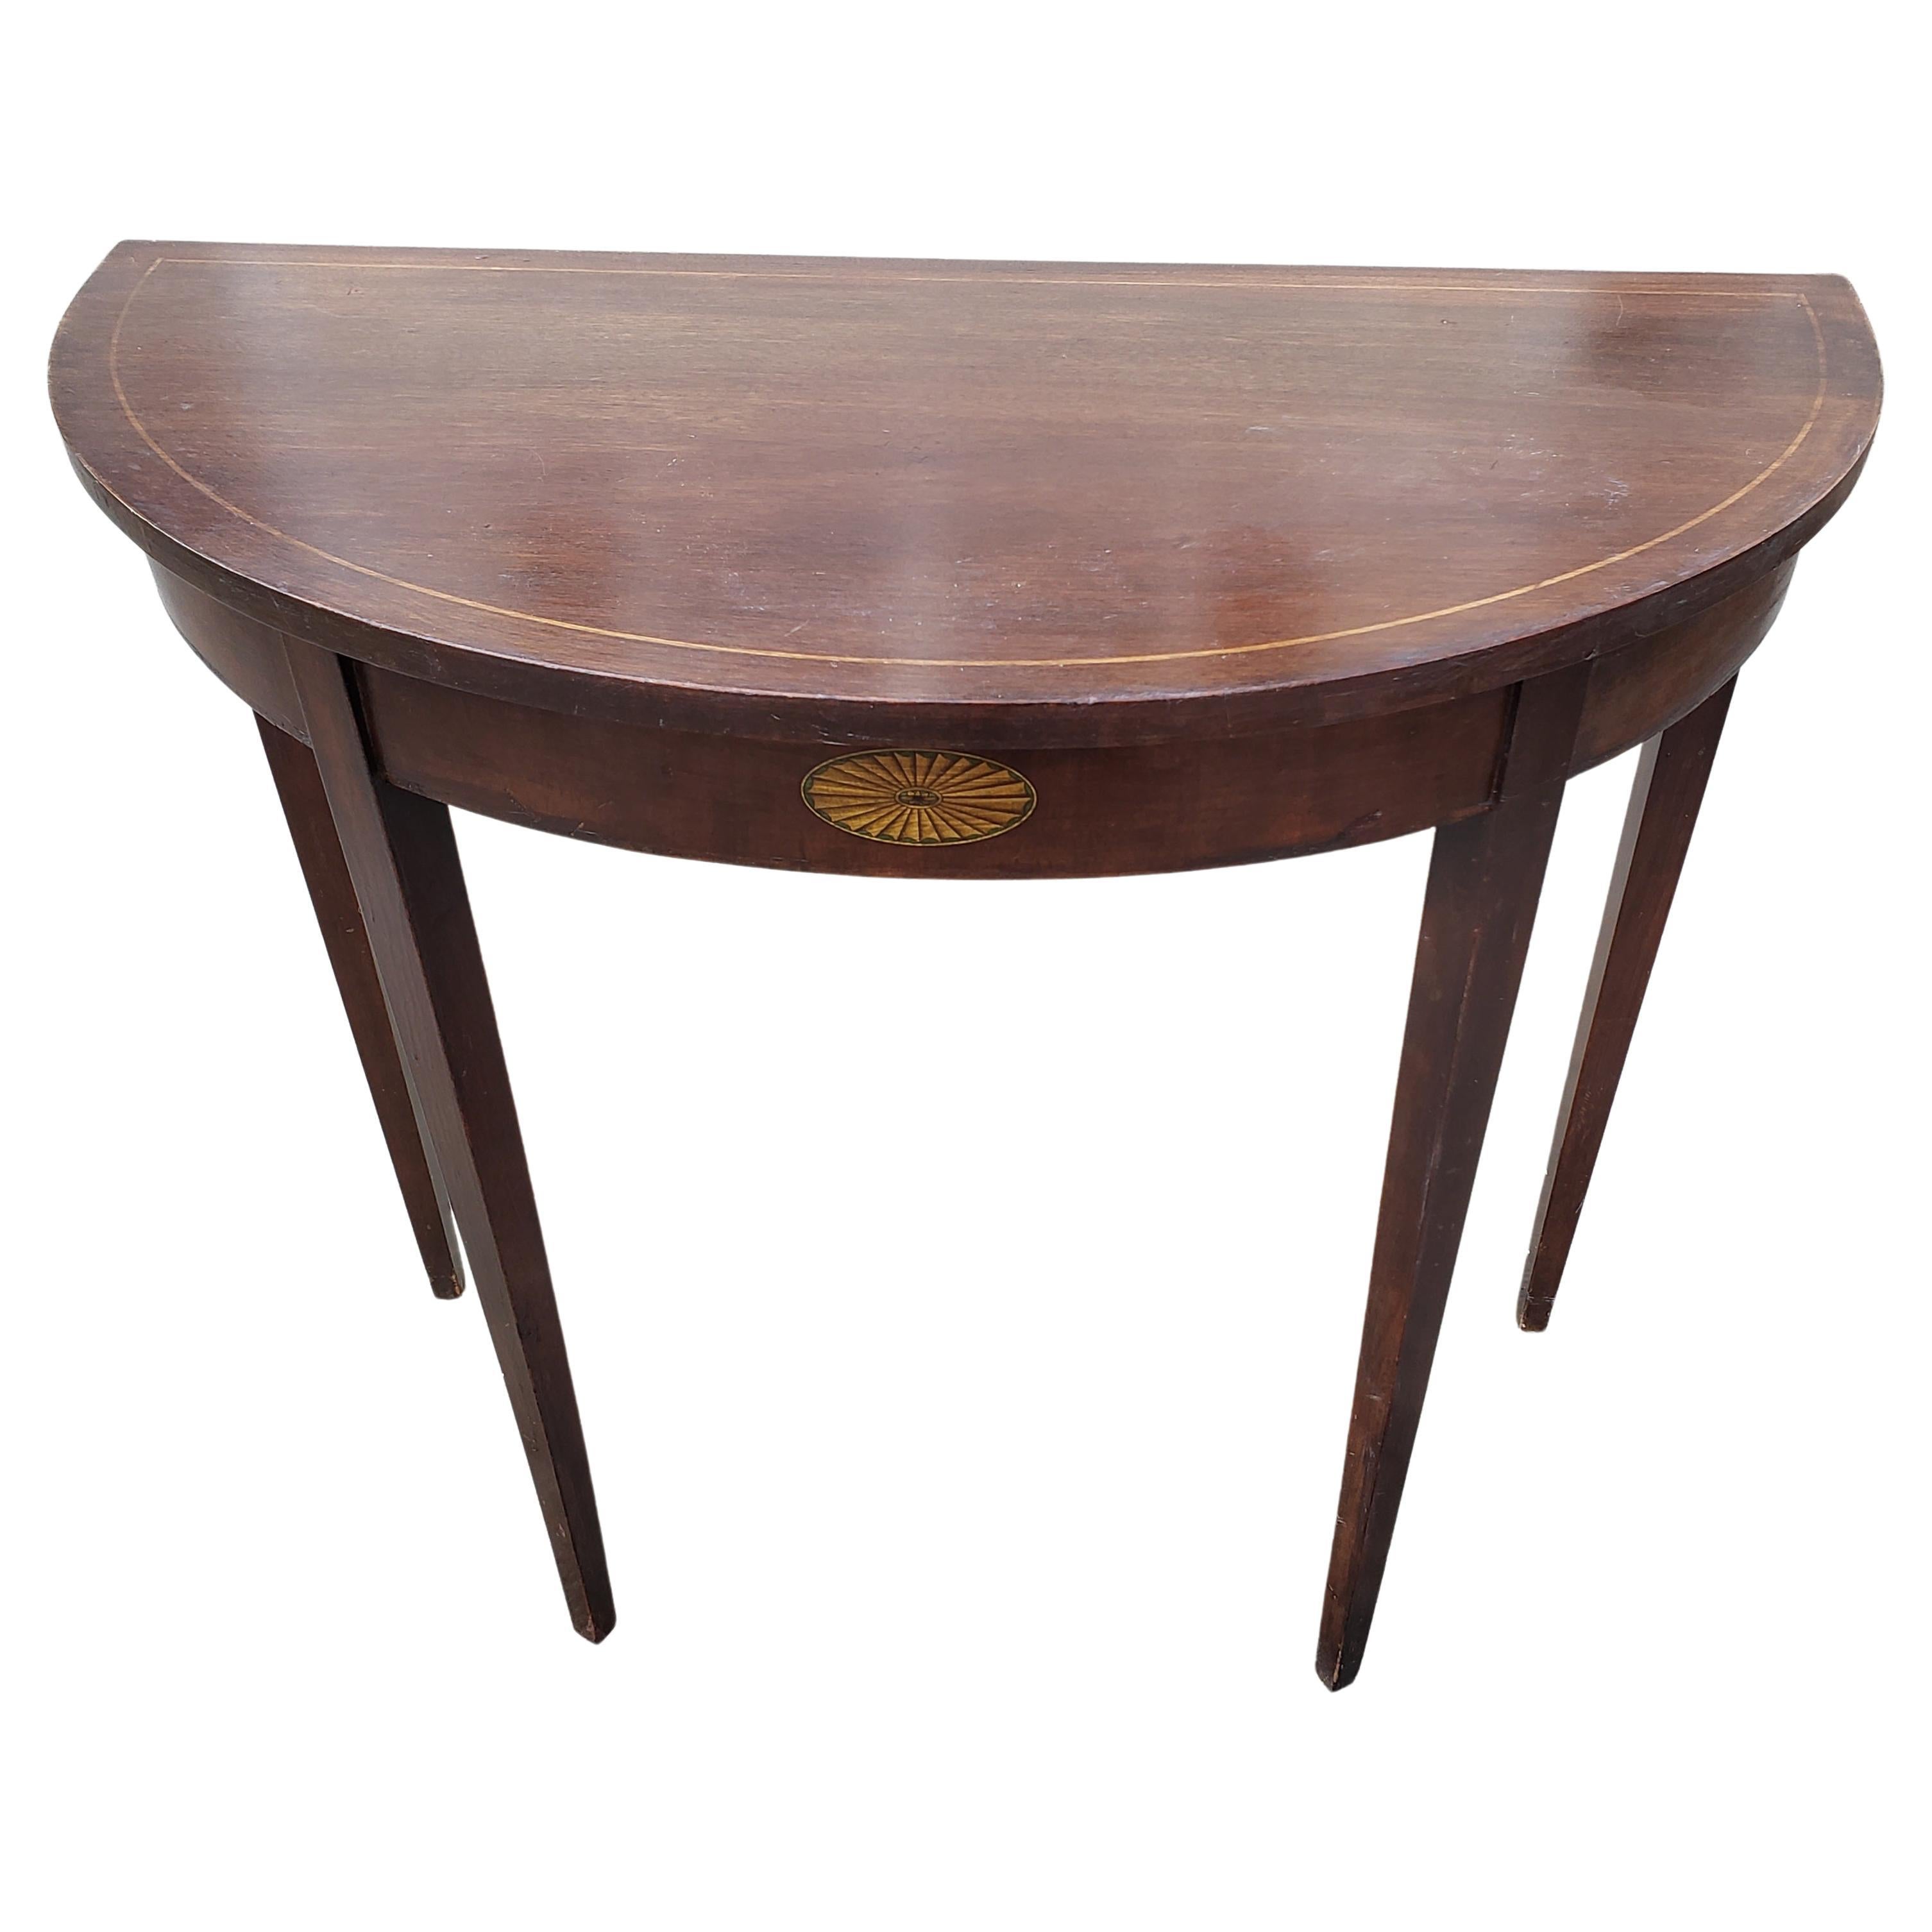 Certified Genuine Mahogany Inlaid Demi Lune Table, Circa 1940s For Sale